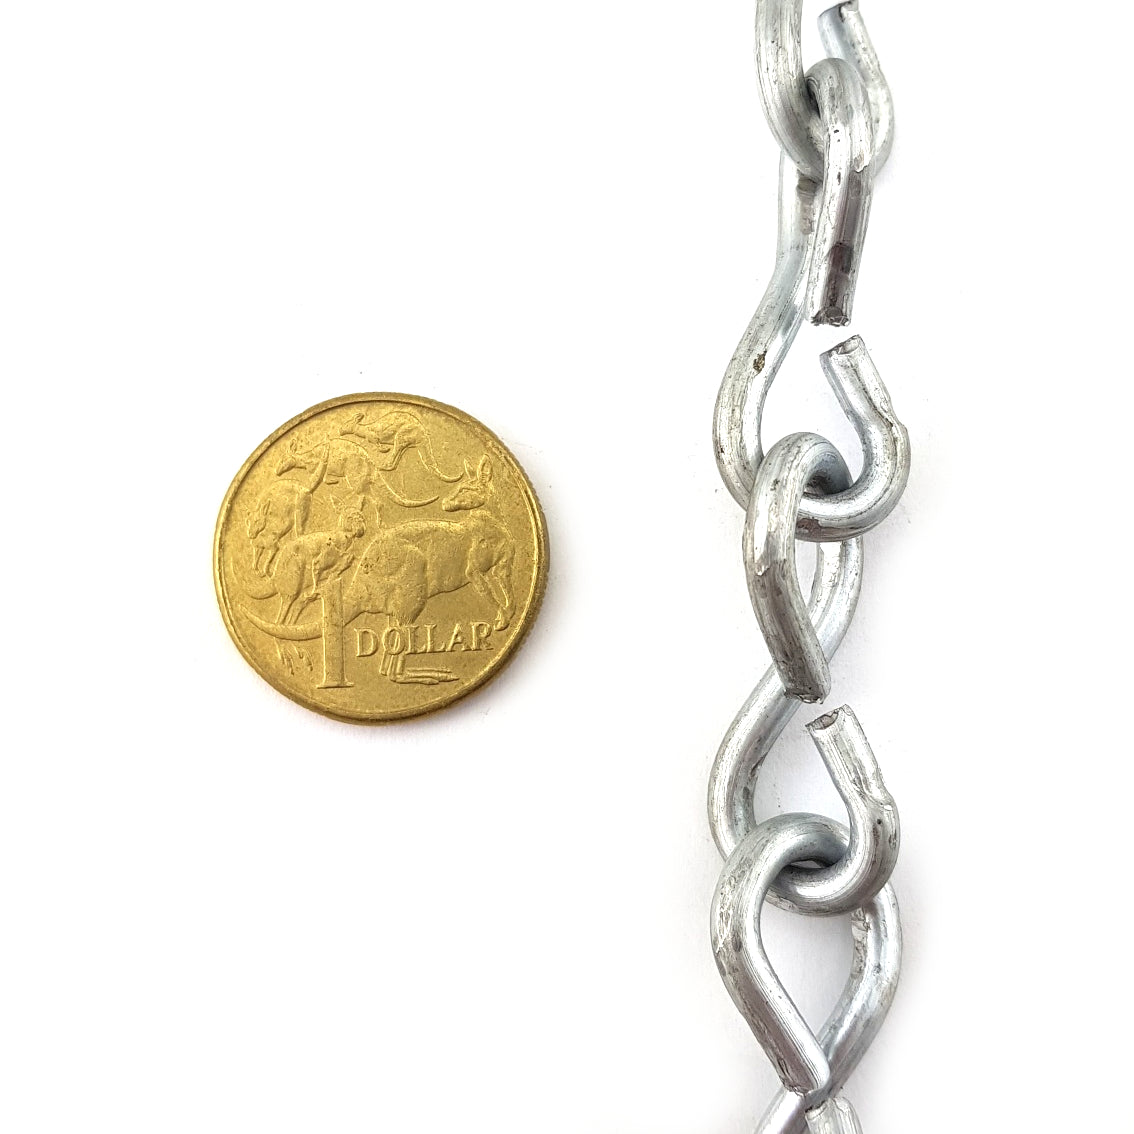 Australian made Single Jack Chain in galvanised finish, size 3.15mm and quantity of 100 metres. Melbourne, Australia.